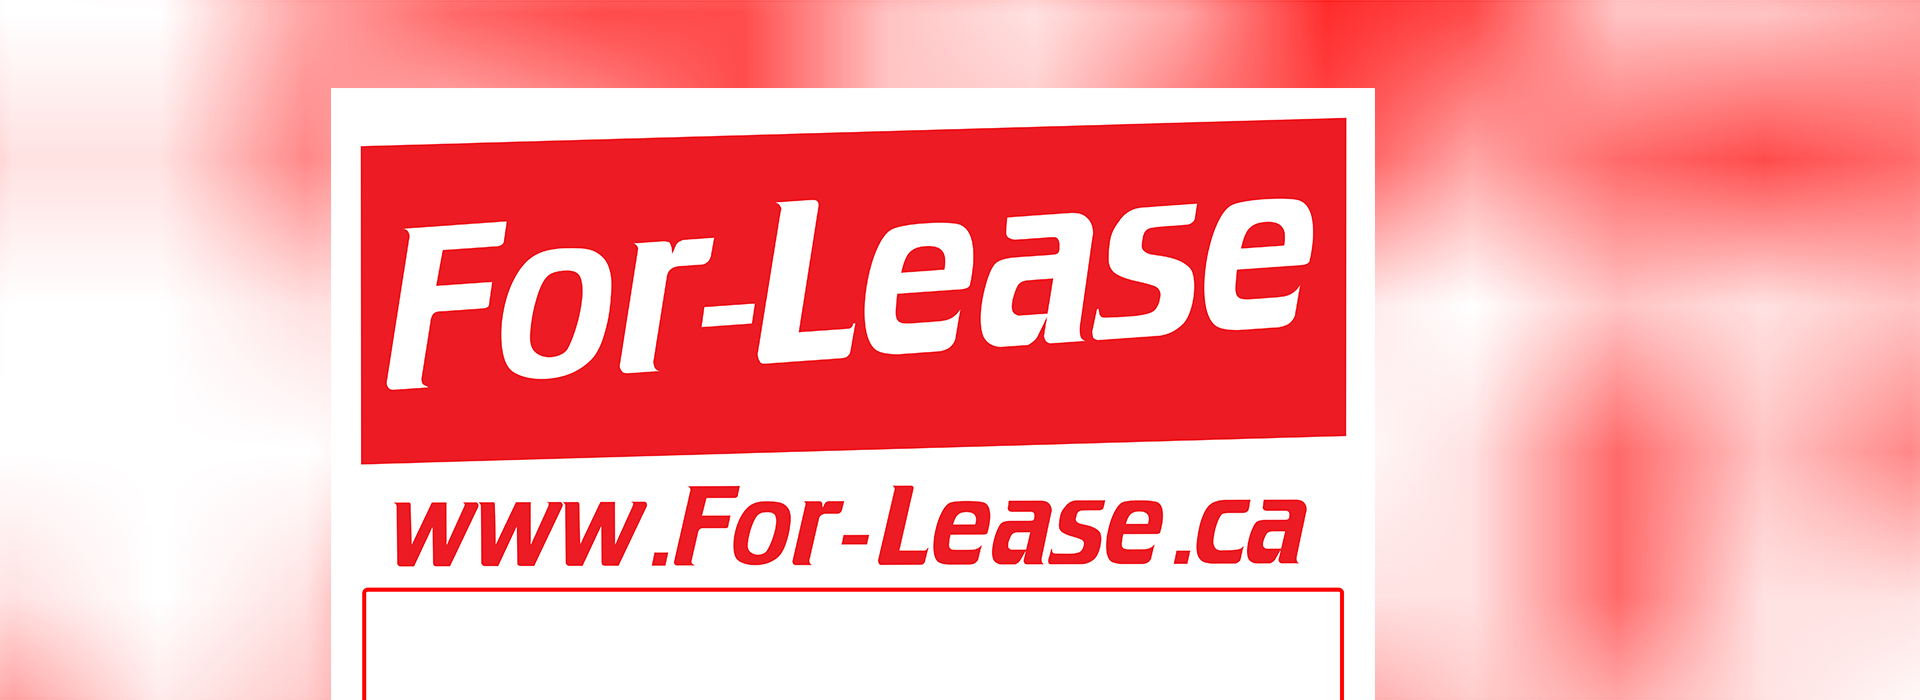 For-Lease.ca